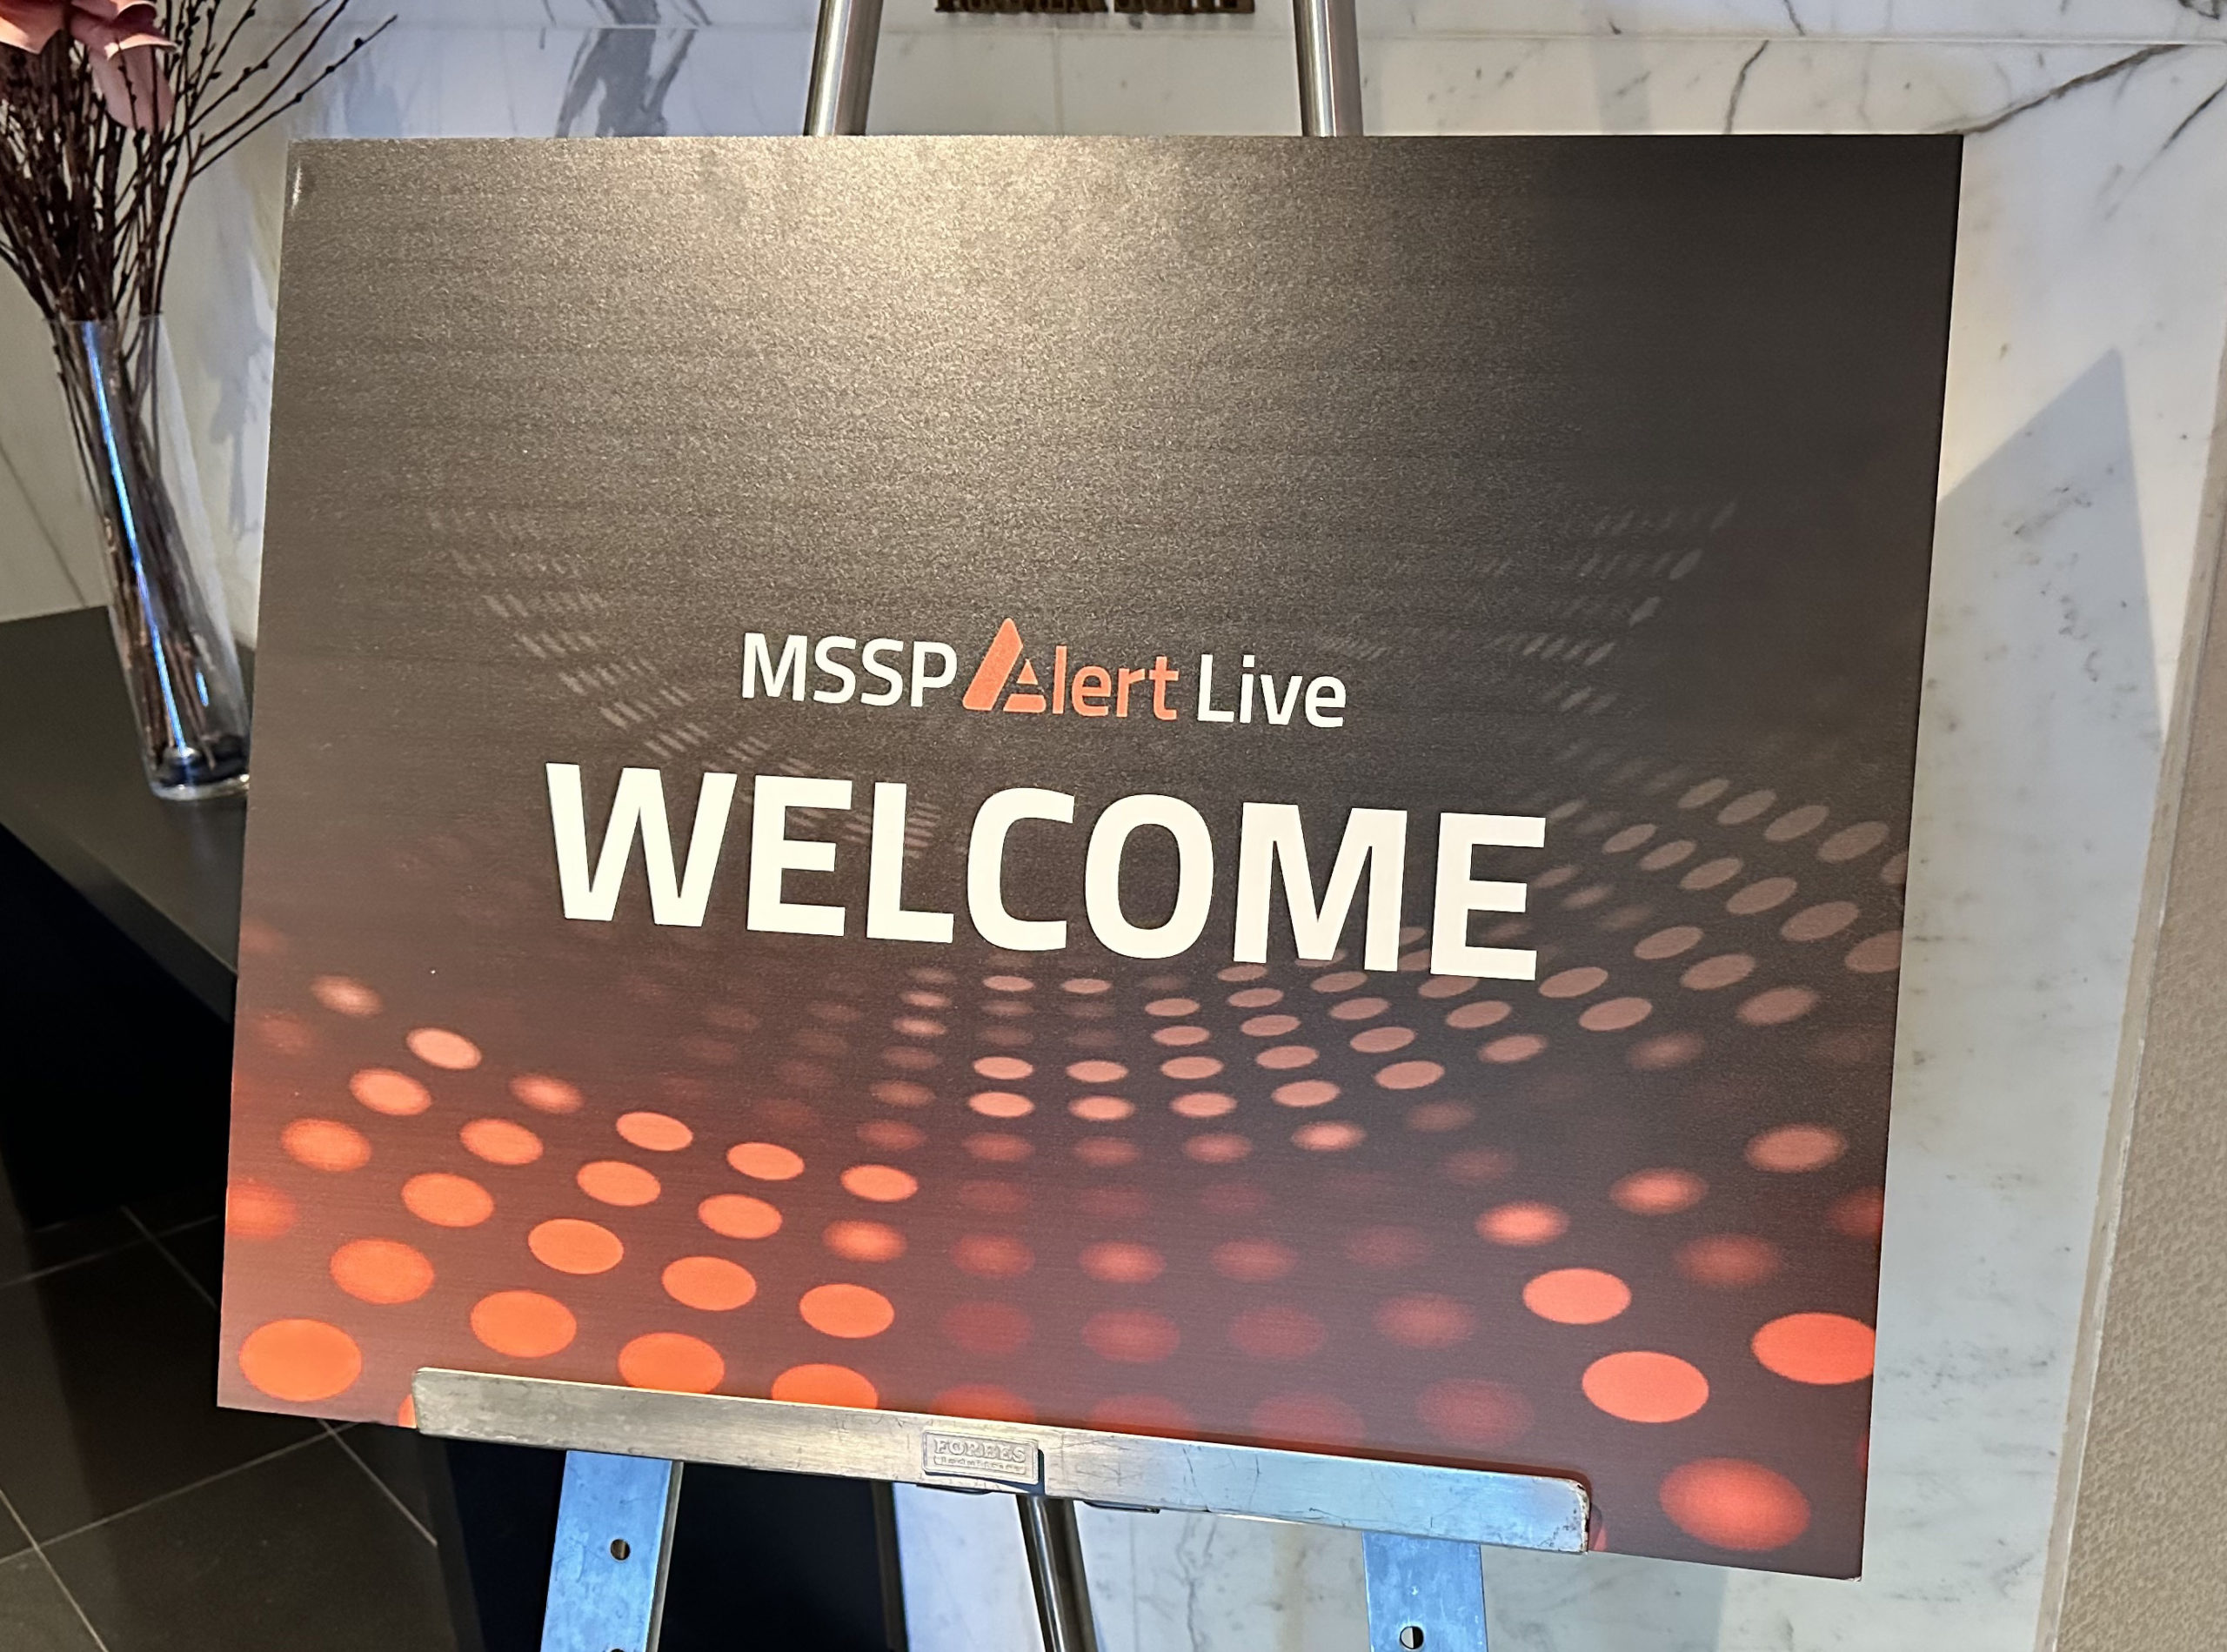 A Day at MSSP Alert Live